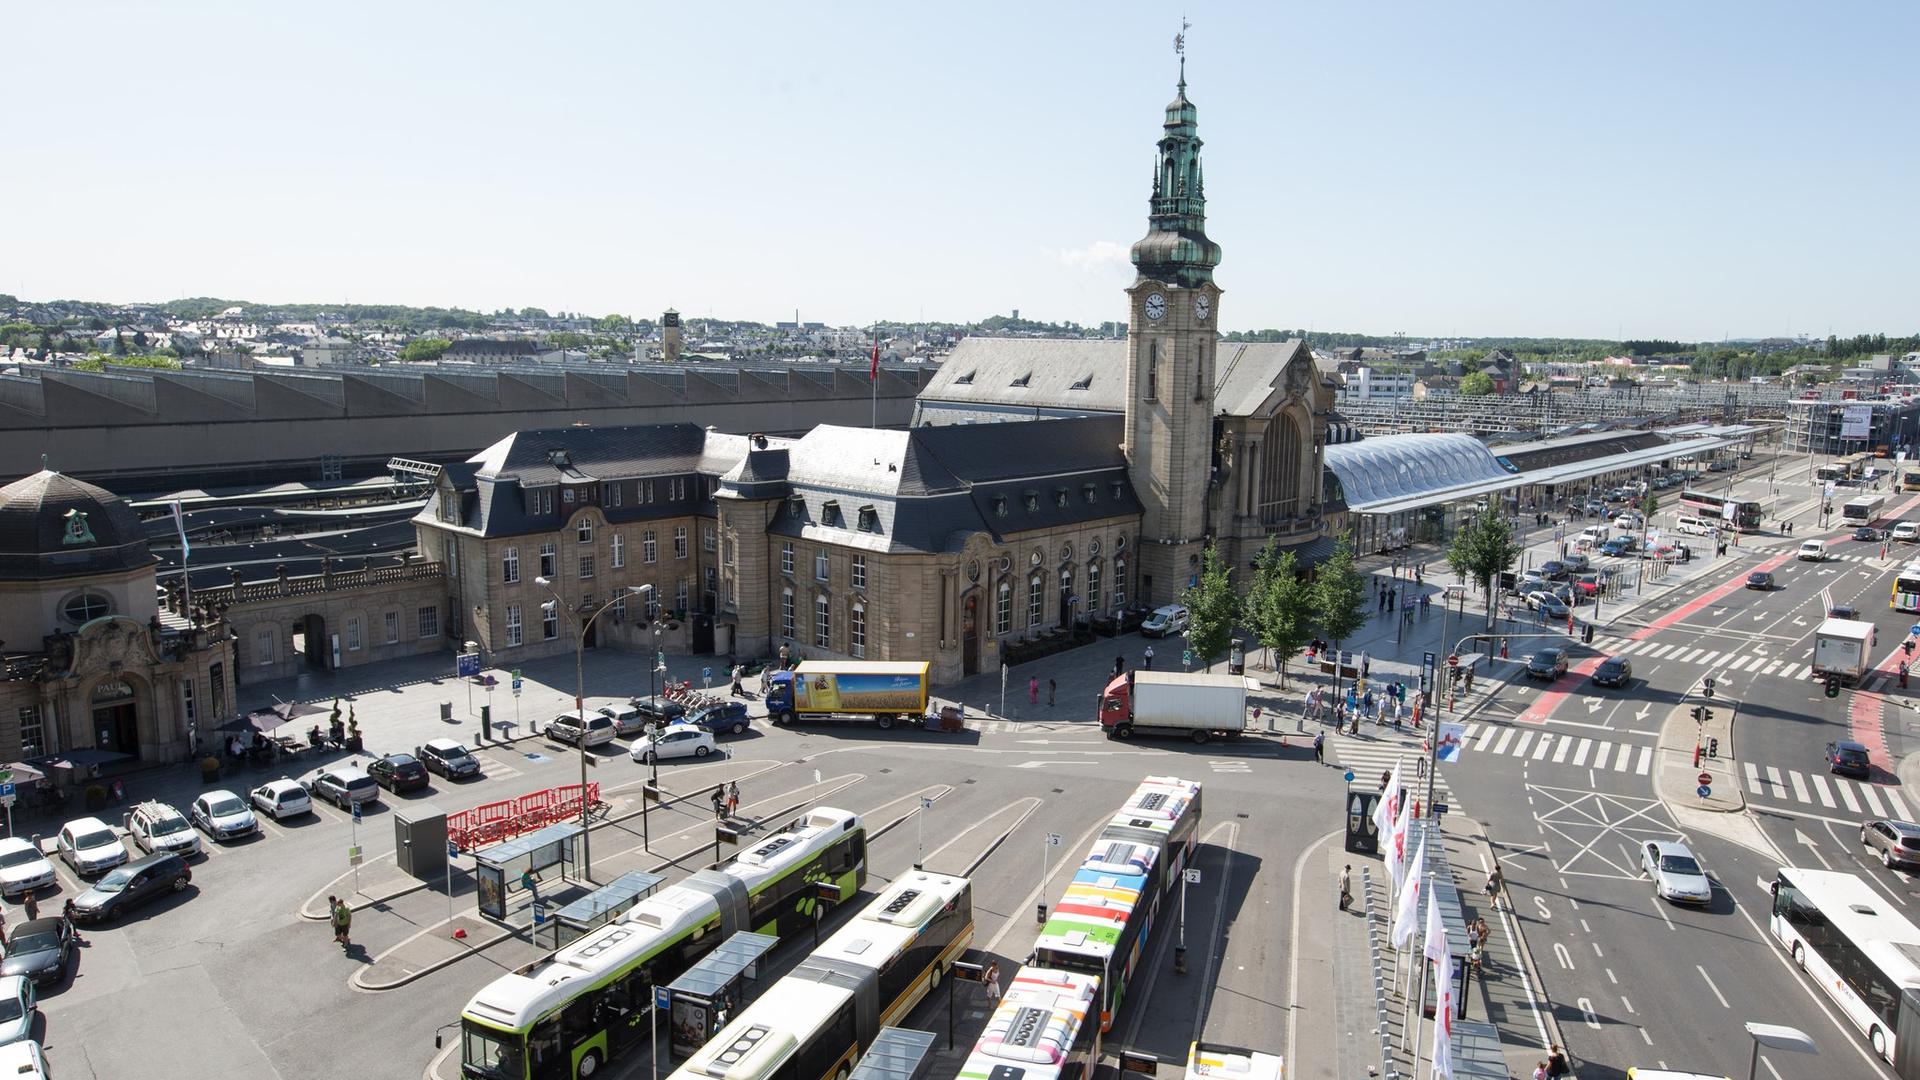 Luxembourg's central train station